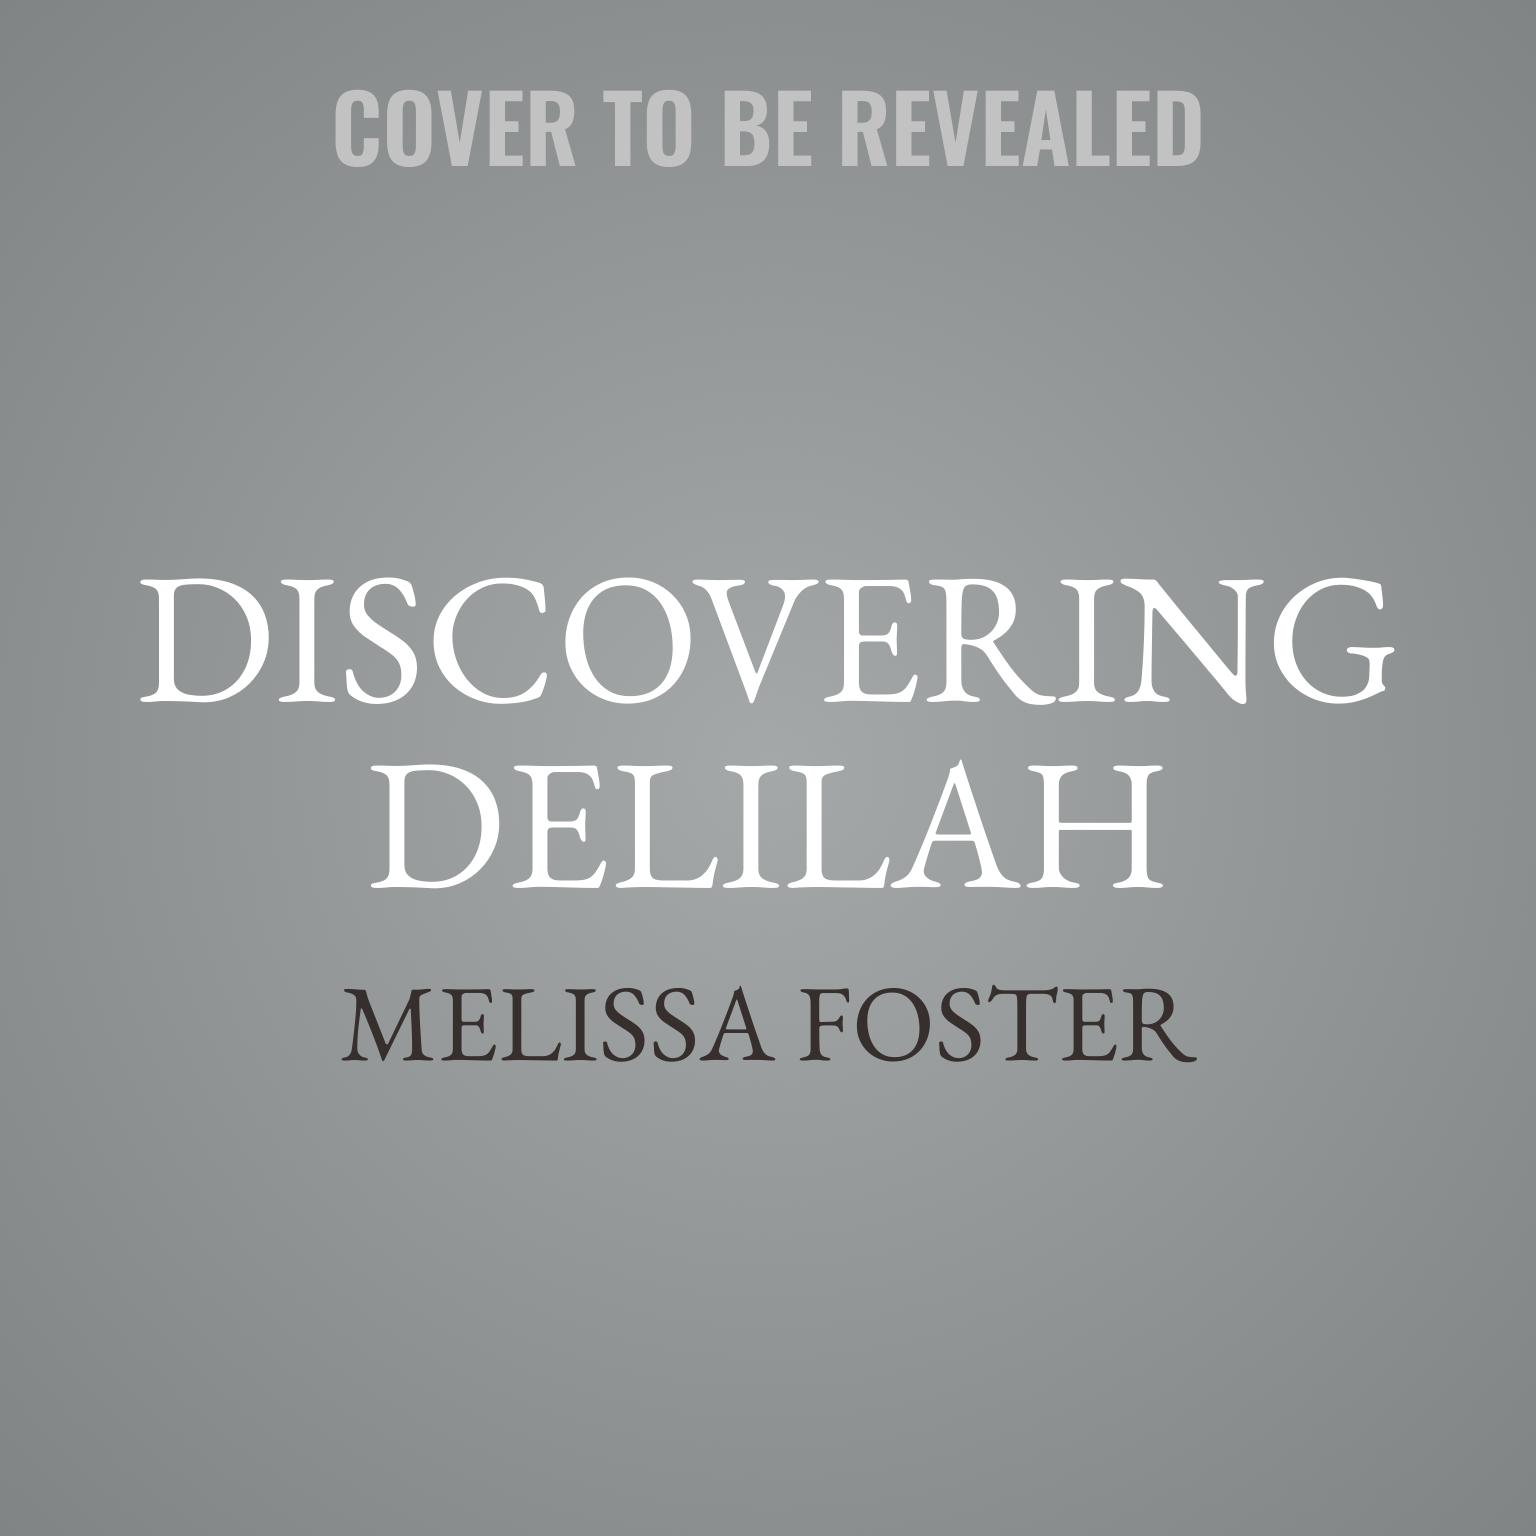 Discovering Delilah: An LGBTQ Love Story Audiobook, by Melissa Foster